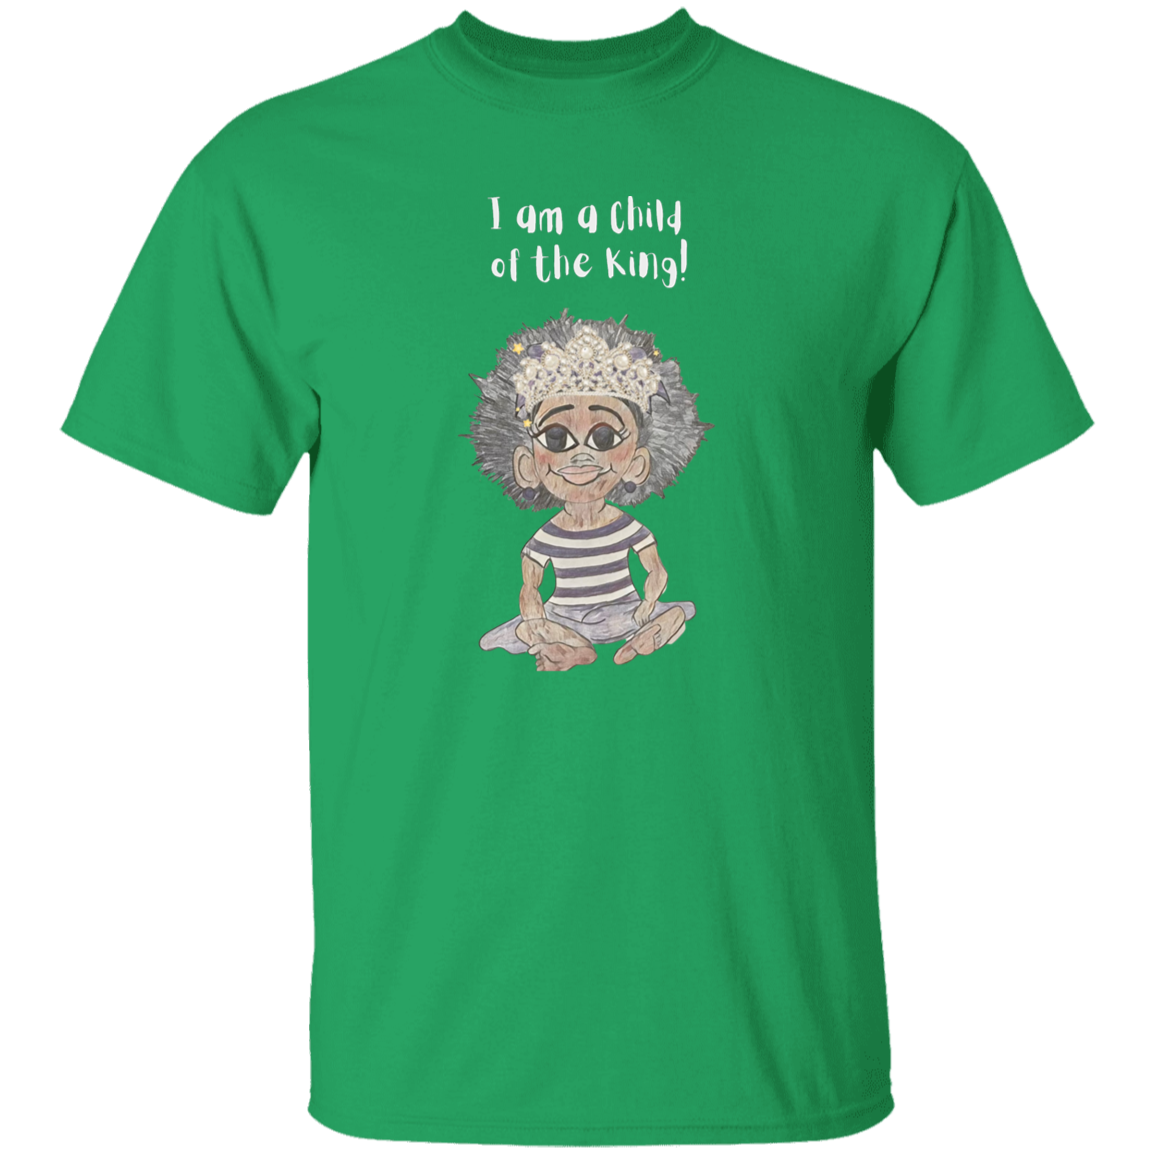 I am a child of the King Youth 5.3 oz 100% Cotton T-Shirt